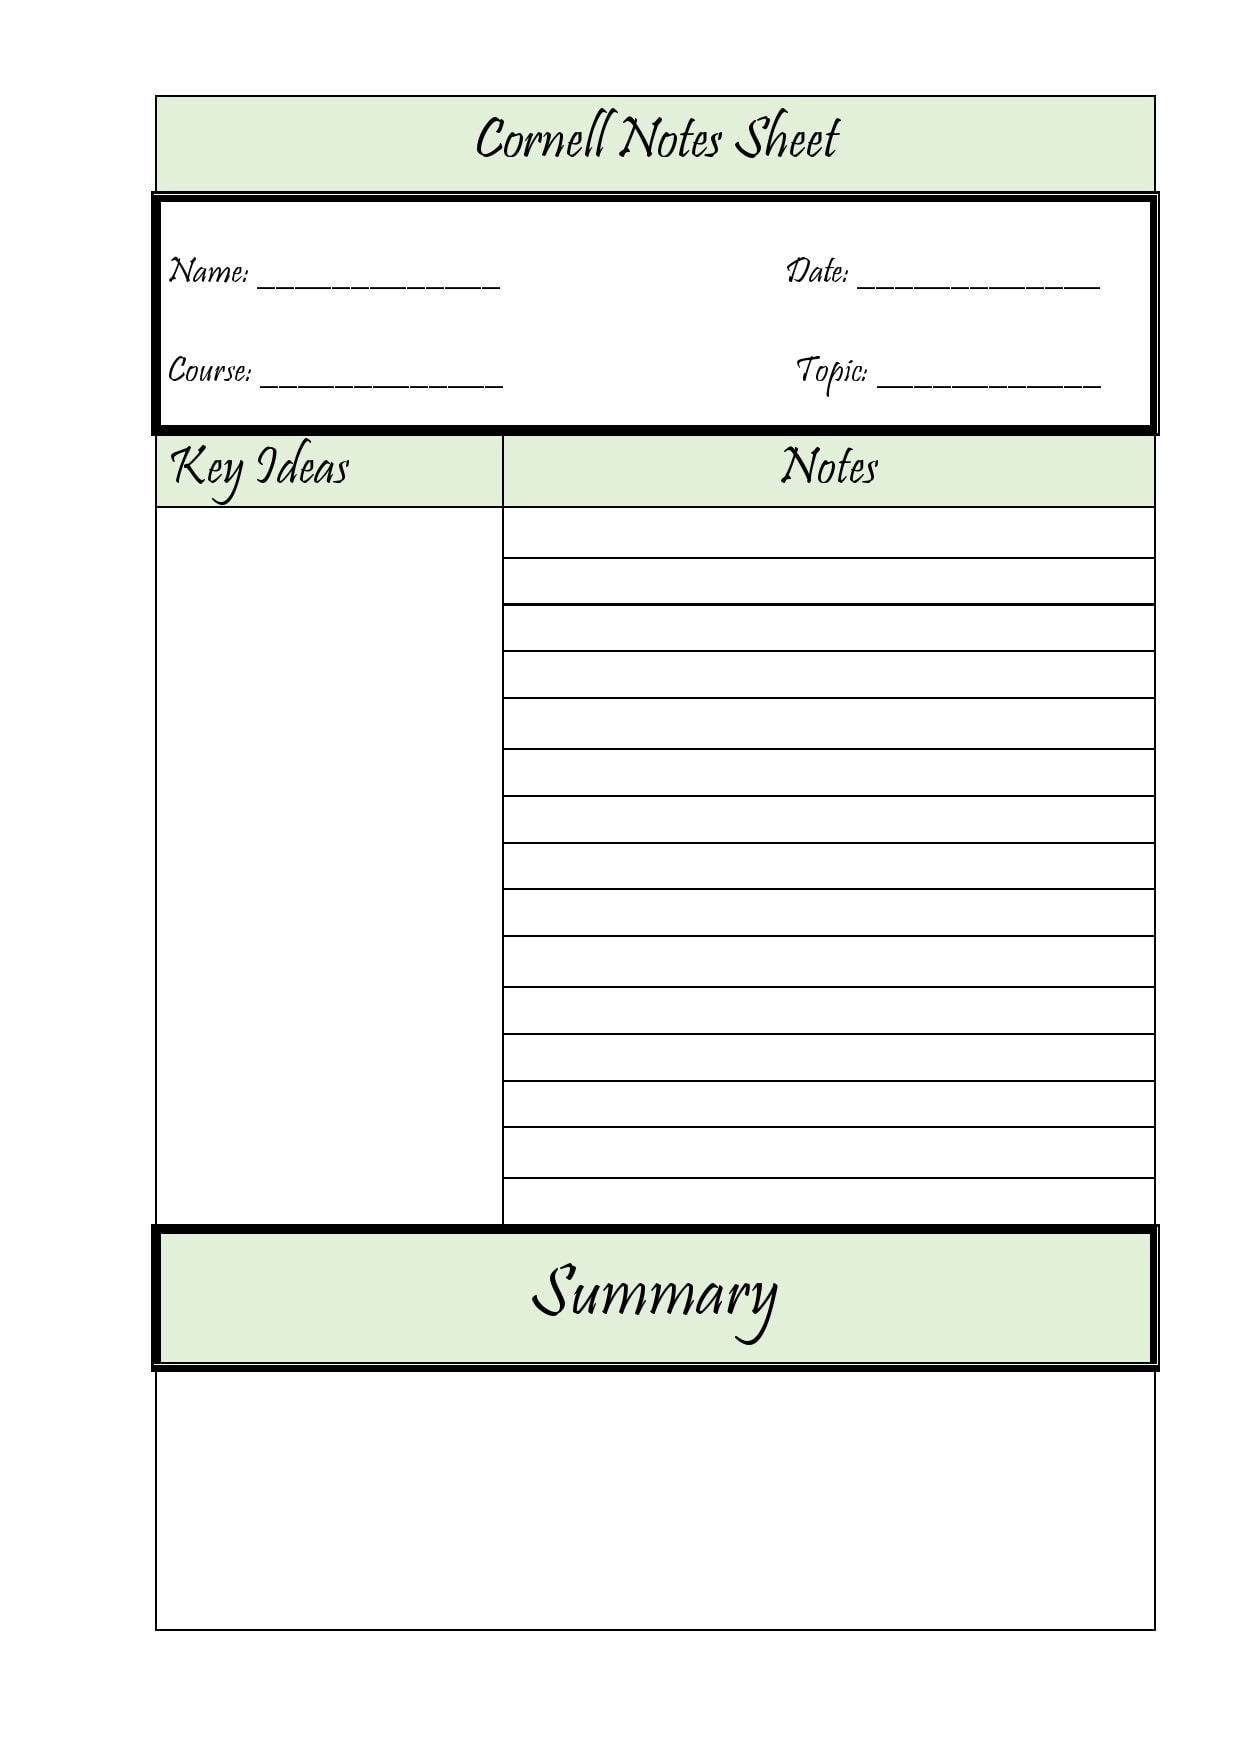 21 Printable Cornell Notes Templates [Free] - TemplateArchive In Novel Notes Template